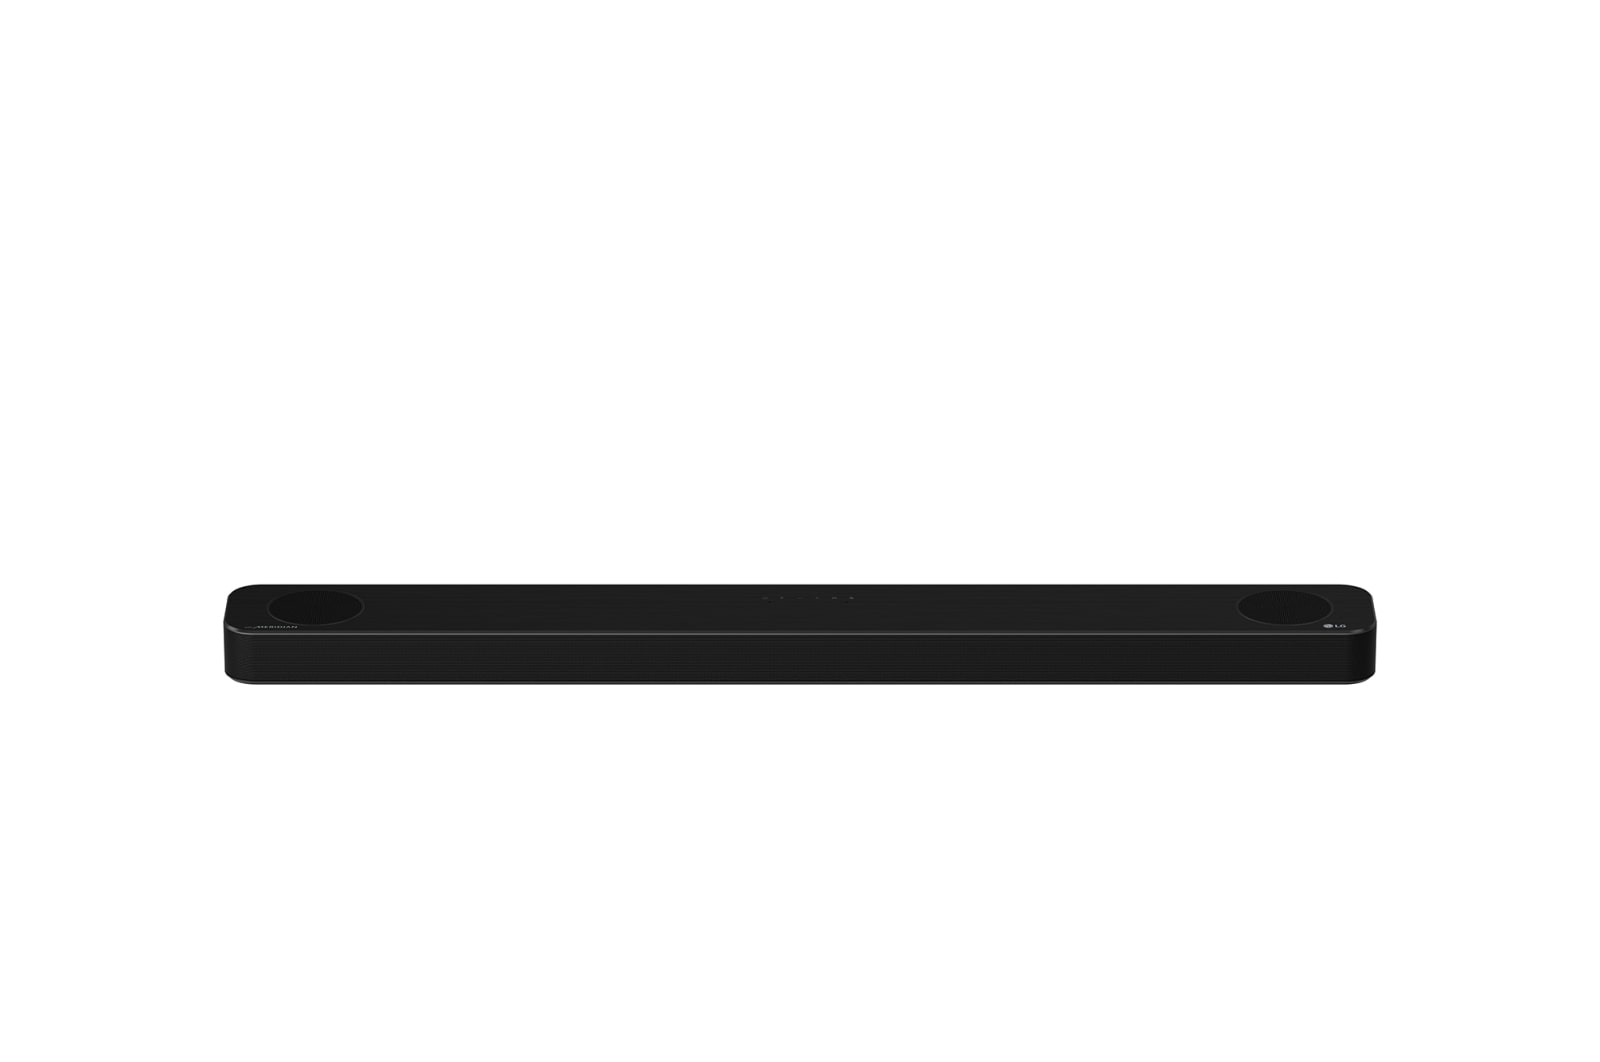 LG SP8YA 3.1.2 Channel Sound Bar with Dolby Atmos® & works with Google Assistant and Alexa